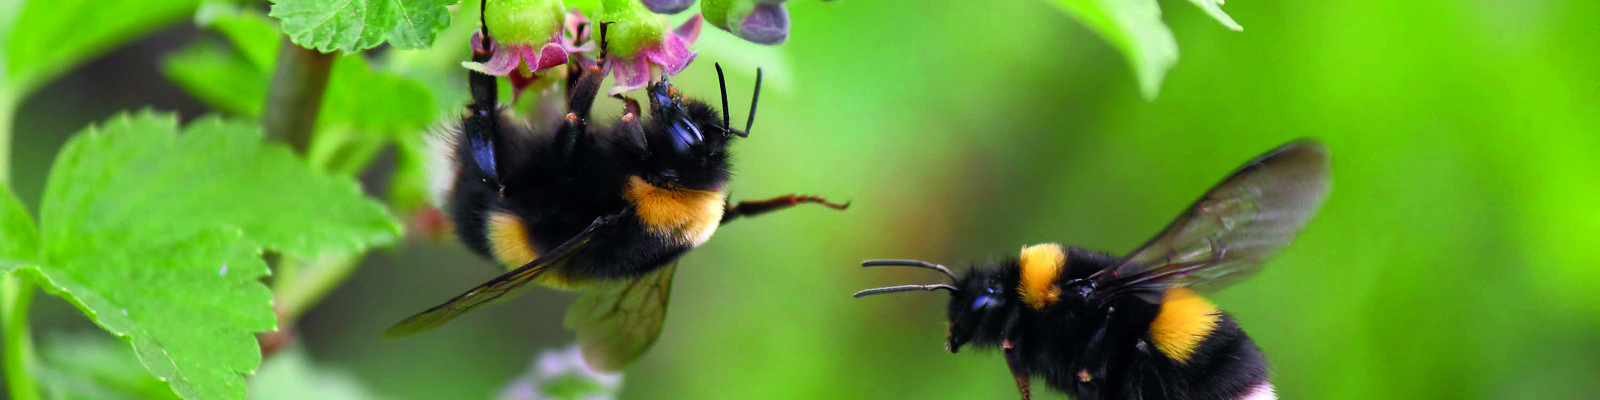 Two bumblebees, one sitting on the flowerbud and one flying next to it. Green  leaves in the background.